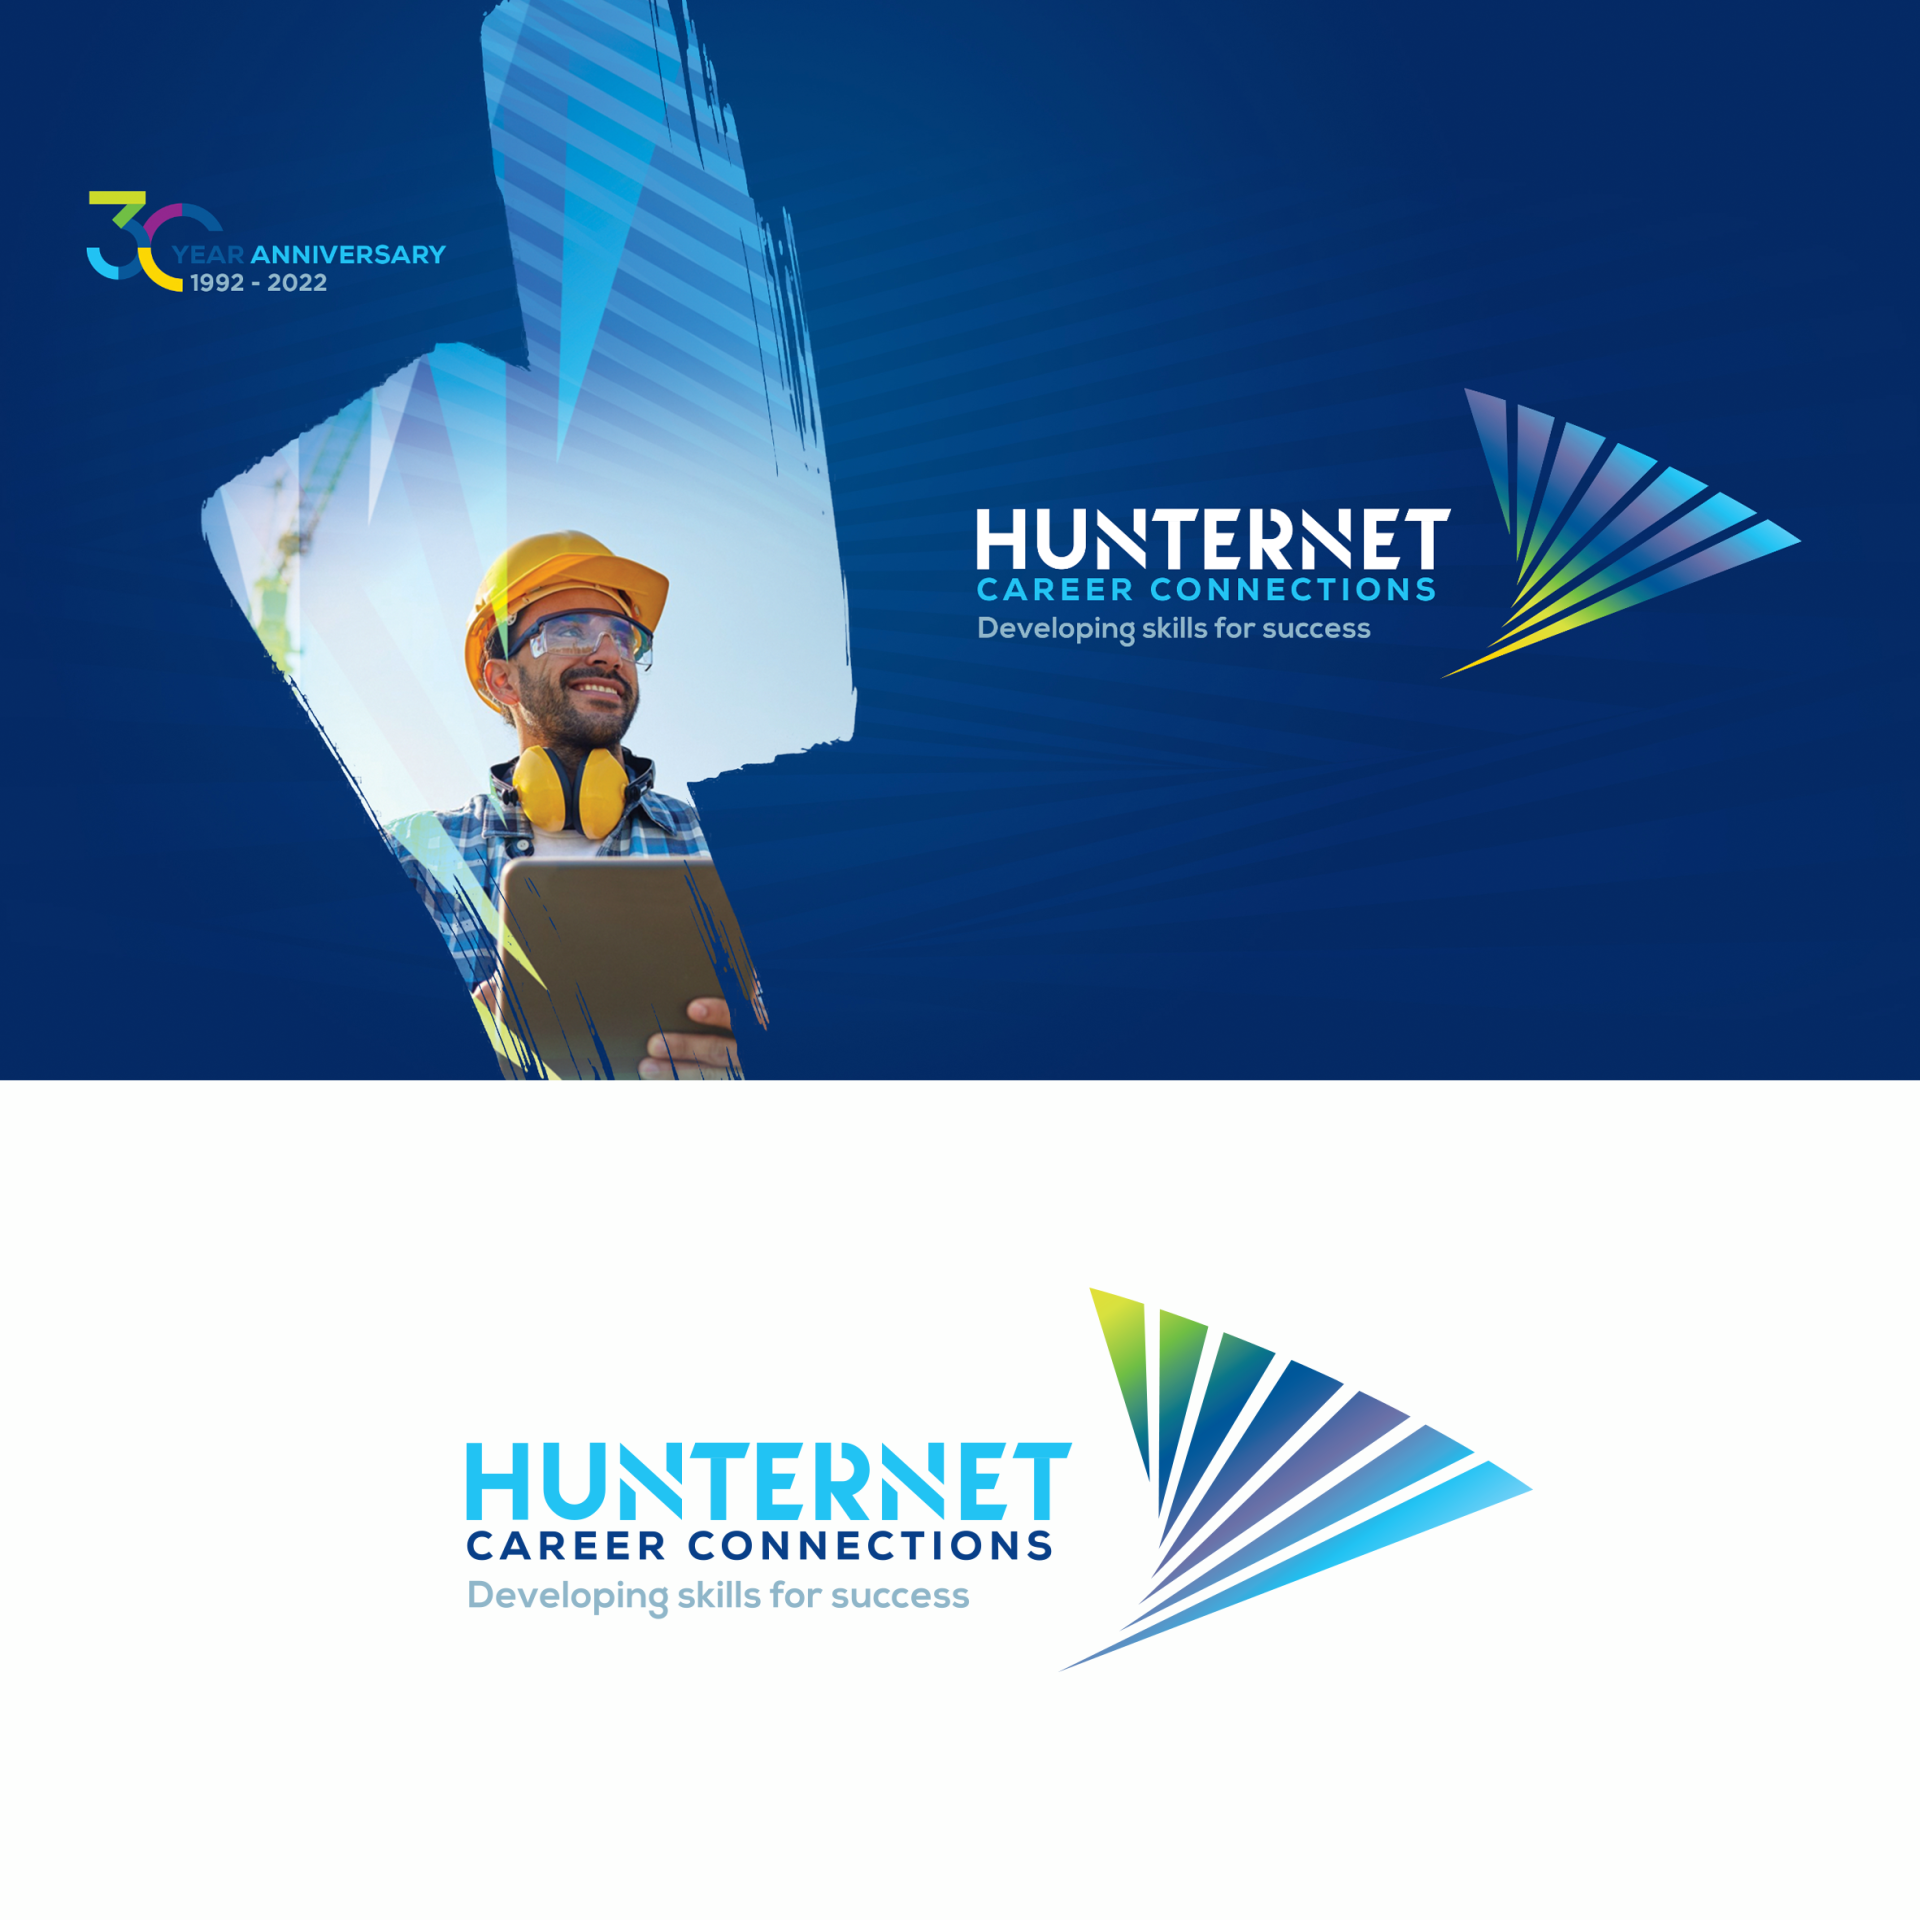 HunterNet Career Connections Brand